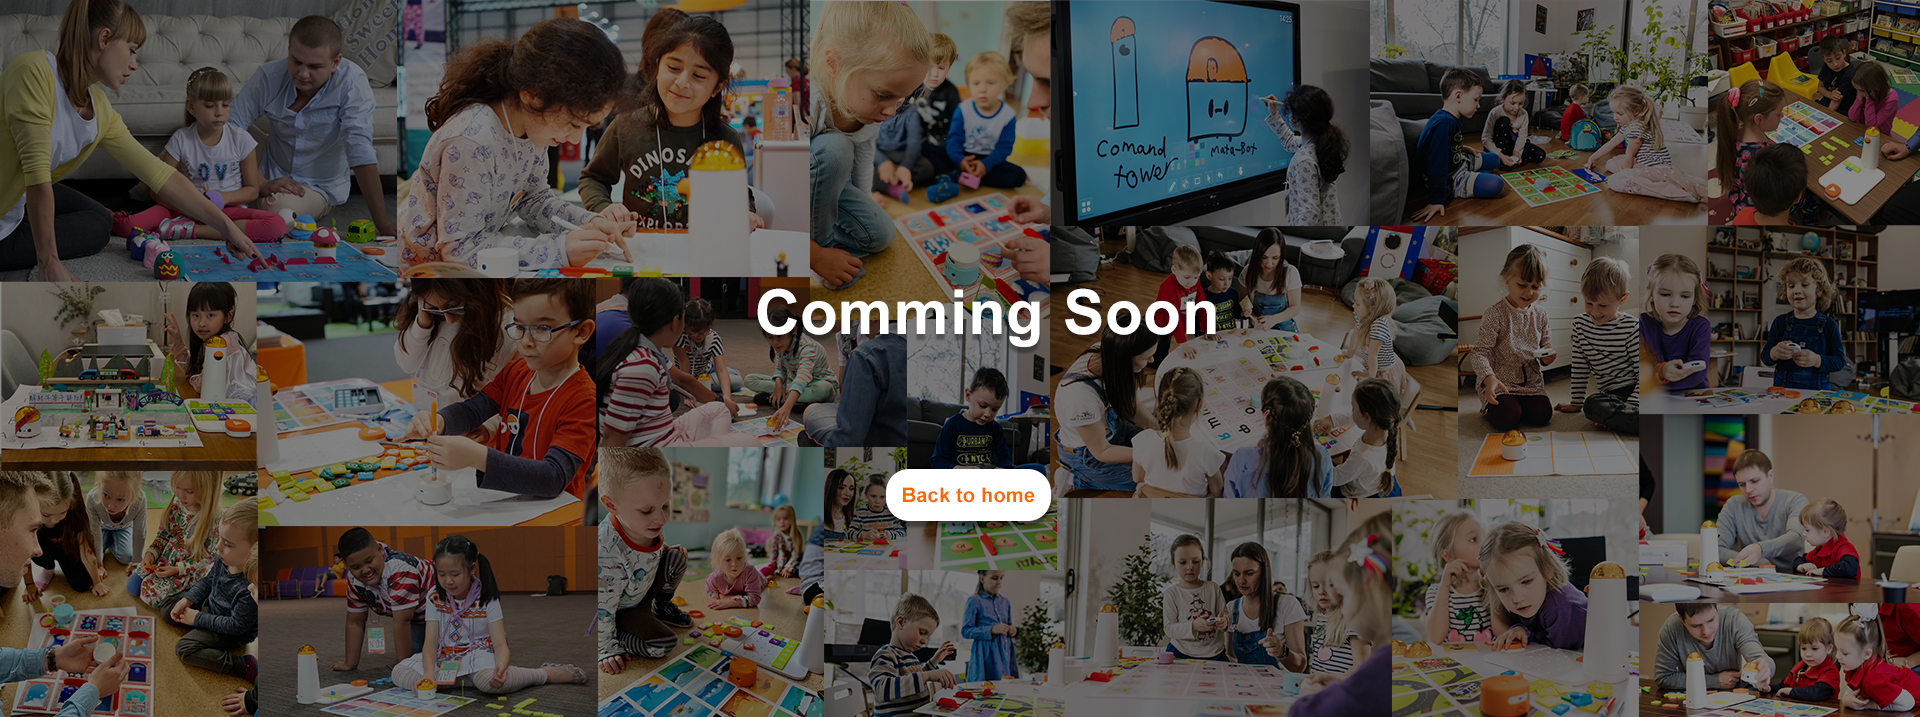 Comming Soon Page - Coding Kits for Kids - Matatalab